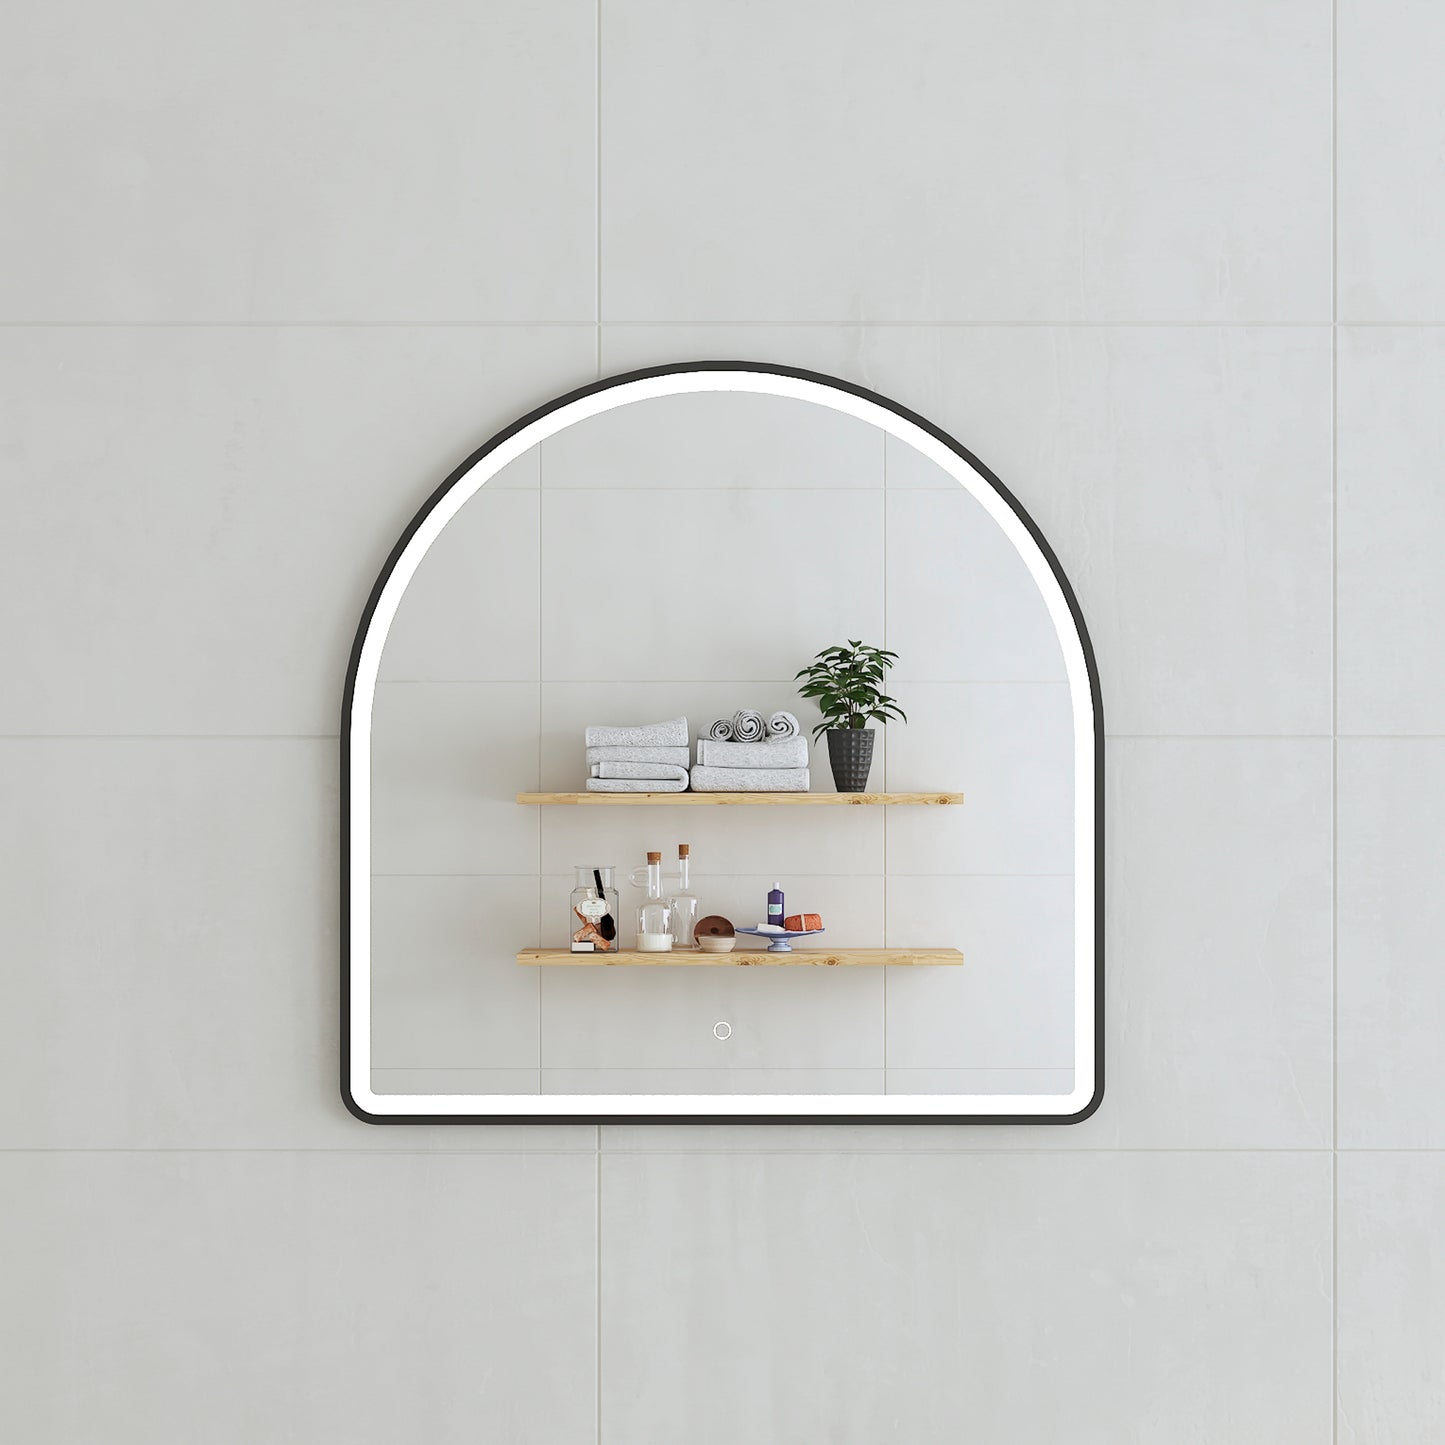 Arco Arch 800mm x 800mm Frontlit LED Framed Mirror in Matte Black with Demister